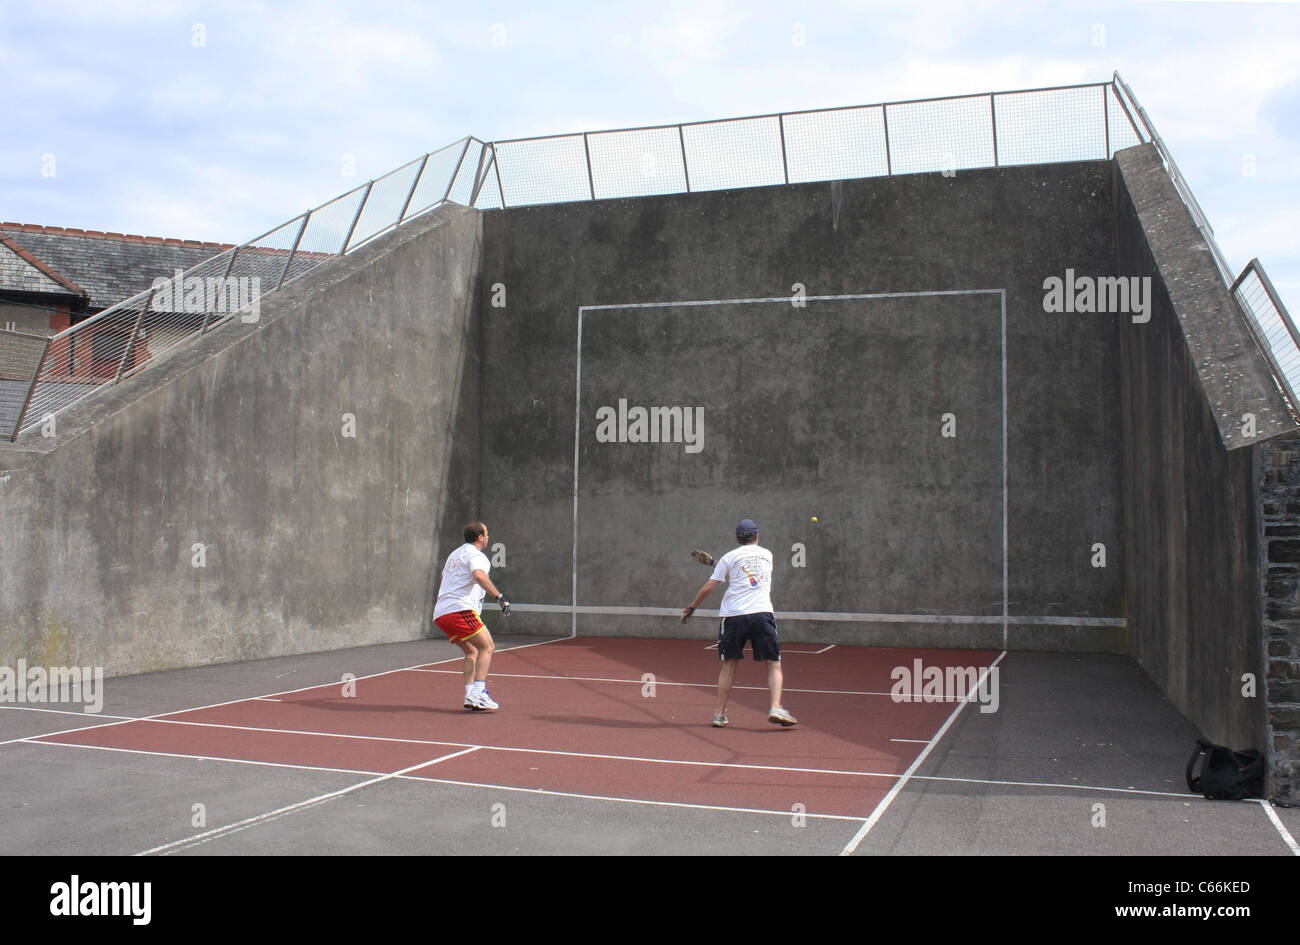 Handball Court In South Wales C66KED 